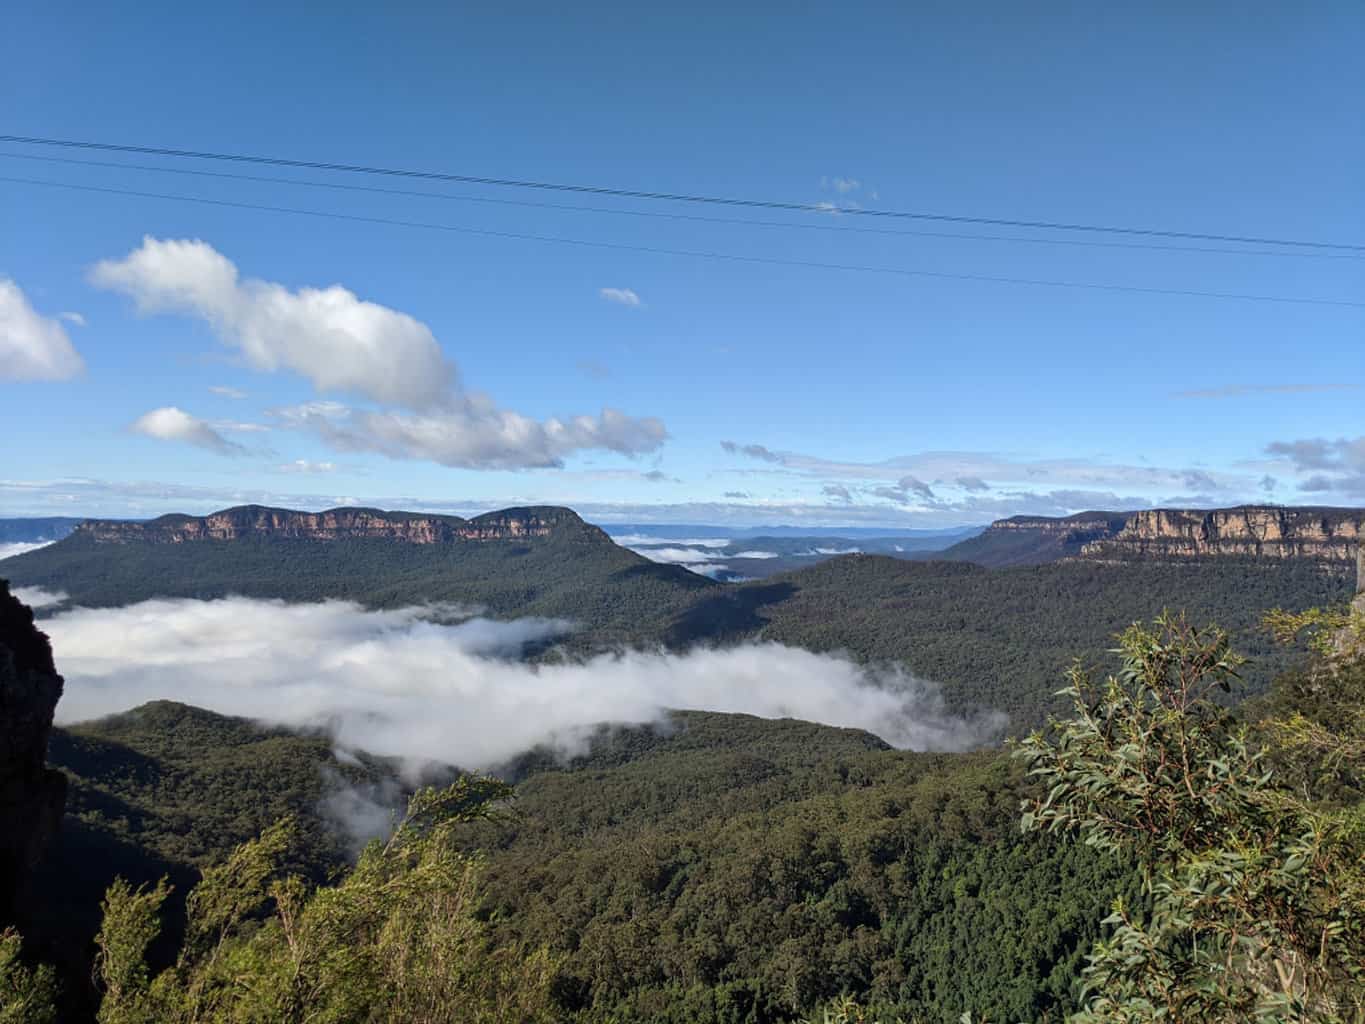 Standing above the clouds looking across the Blue Mountains range in New South Wales, Australia